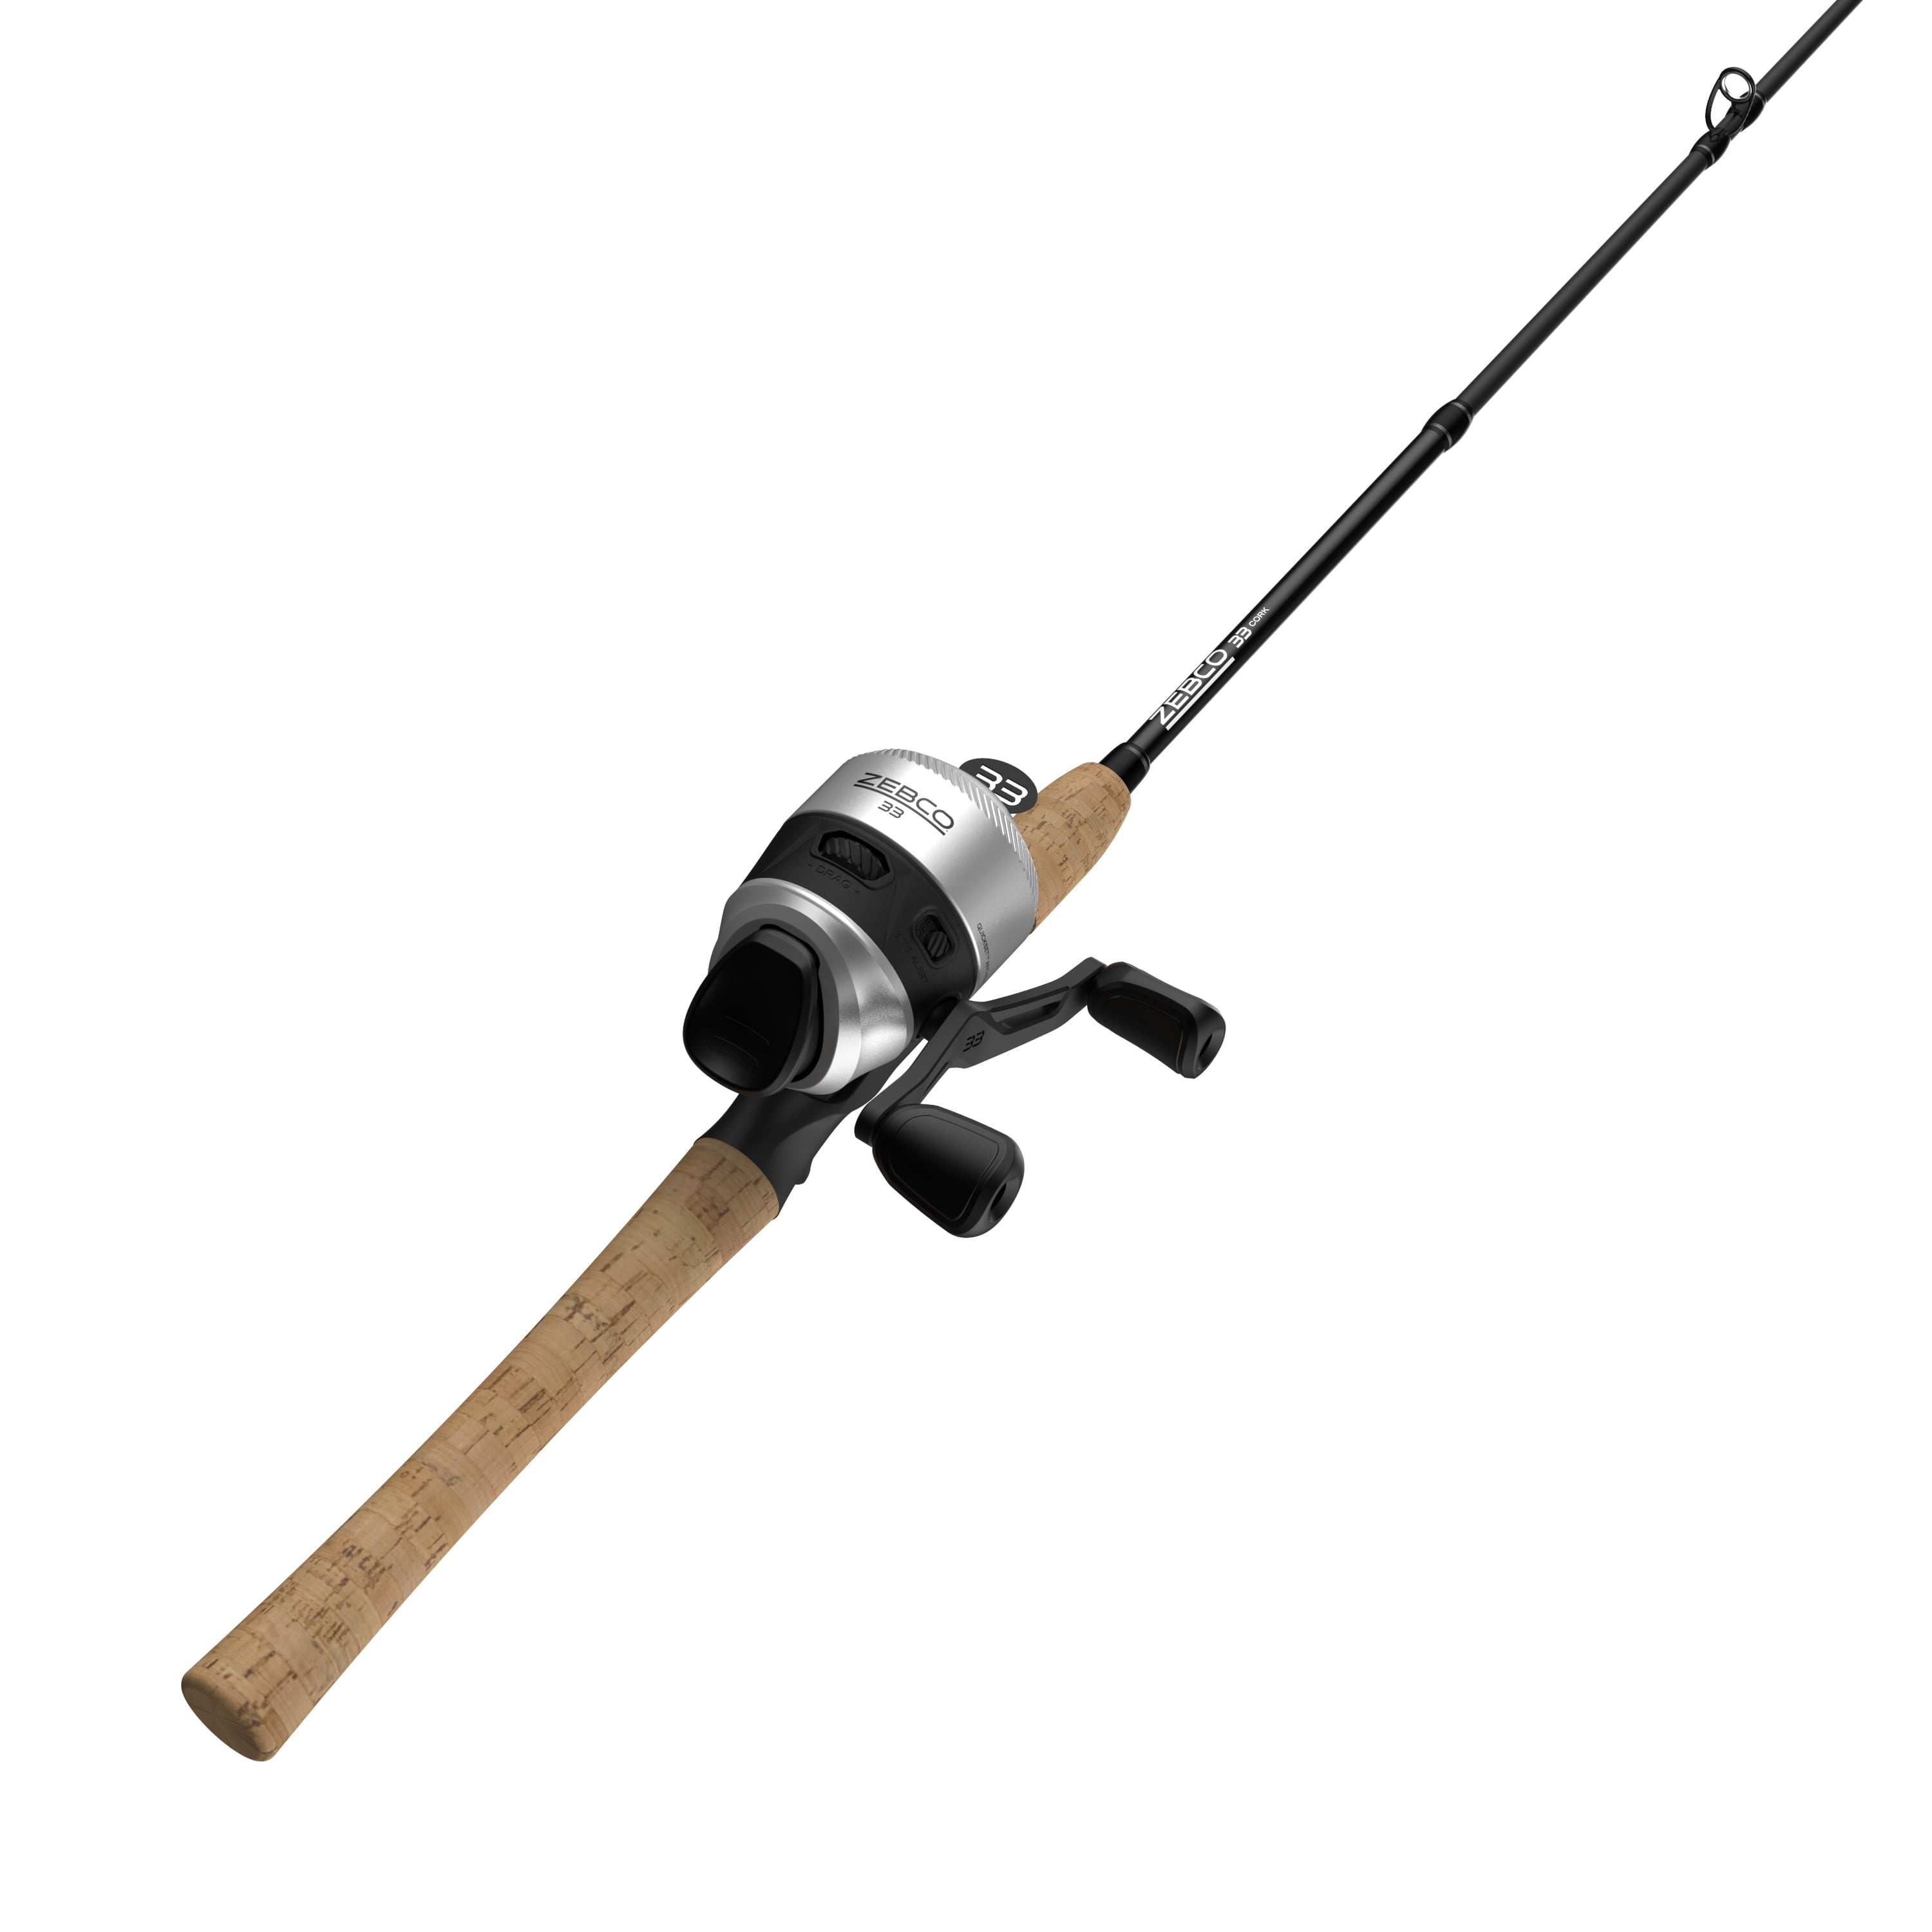 Zebco 33 Cork Spincast Reel and Fishing Rod Combo, Pre-Spooled 10-Pound  Line, Silver 